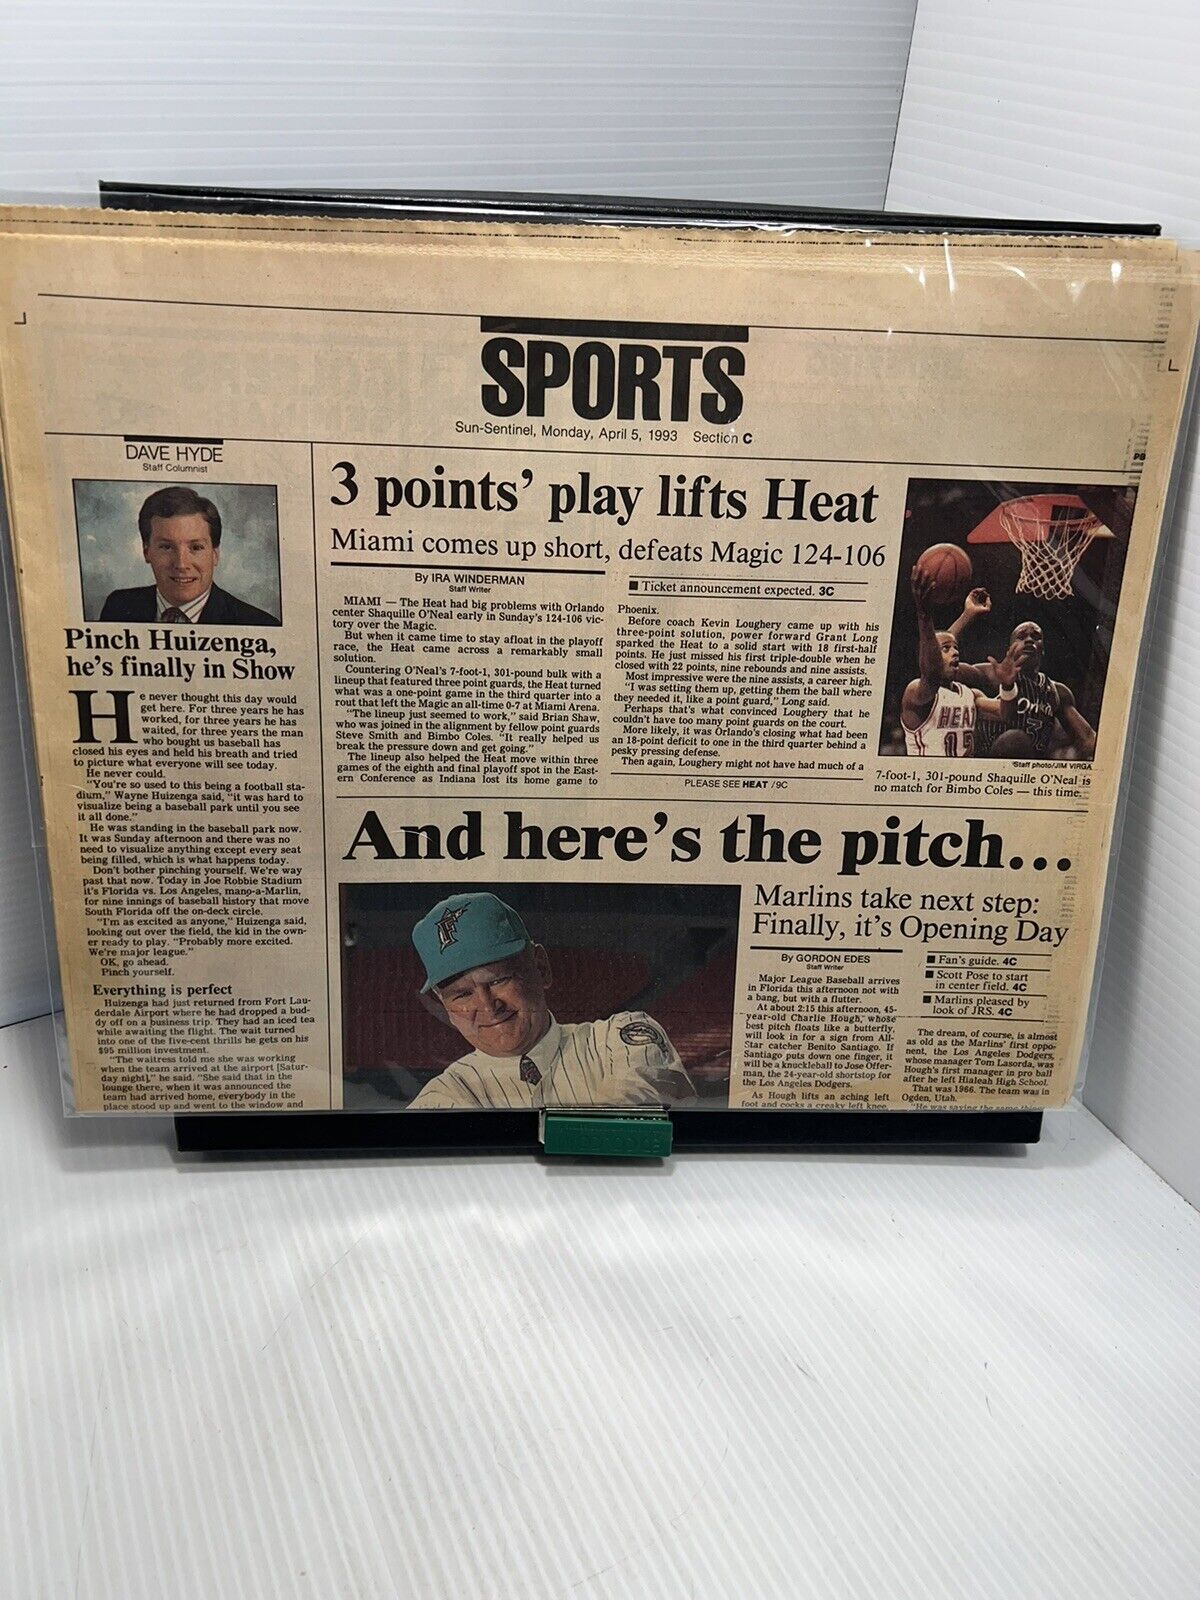 Florida Marlins Inaugural 1993 Newspaper - Sports Section “C” Excellent Cond